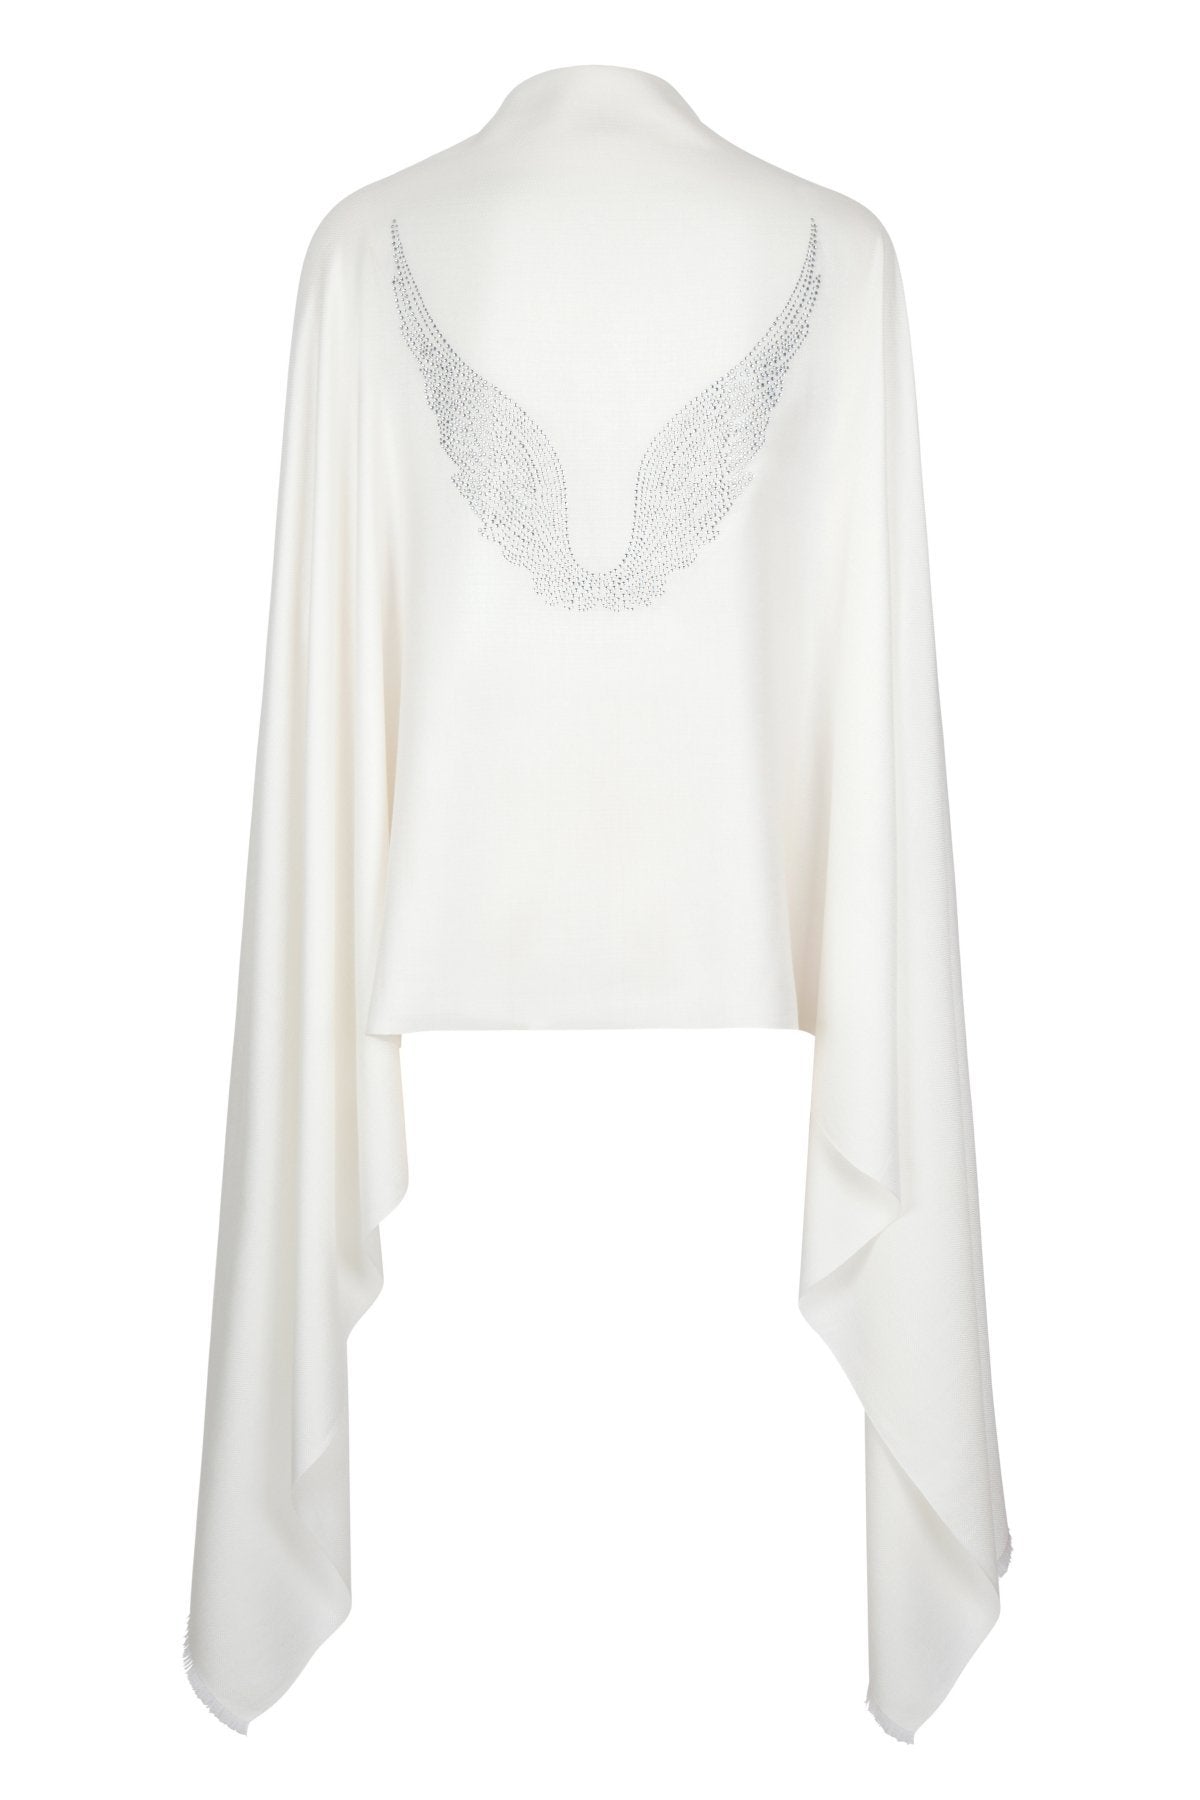 Angel Gabriel Ivory Wrap Wings Scarf for Communication, Family & Creativity